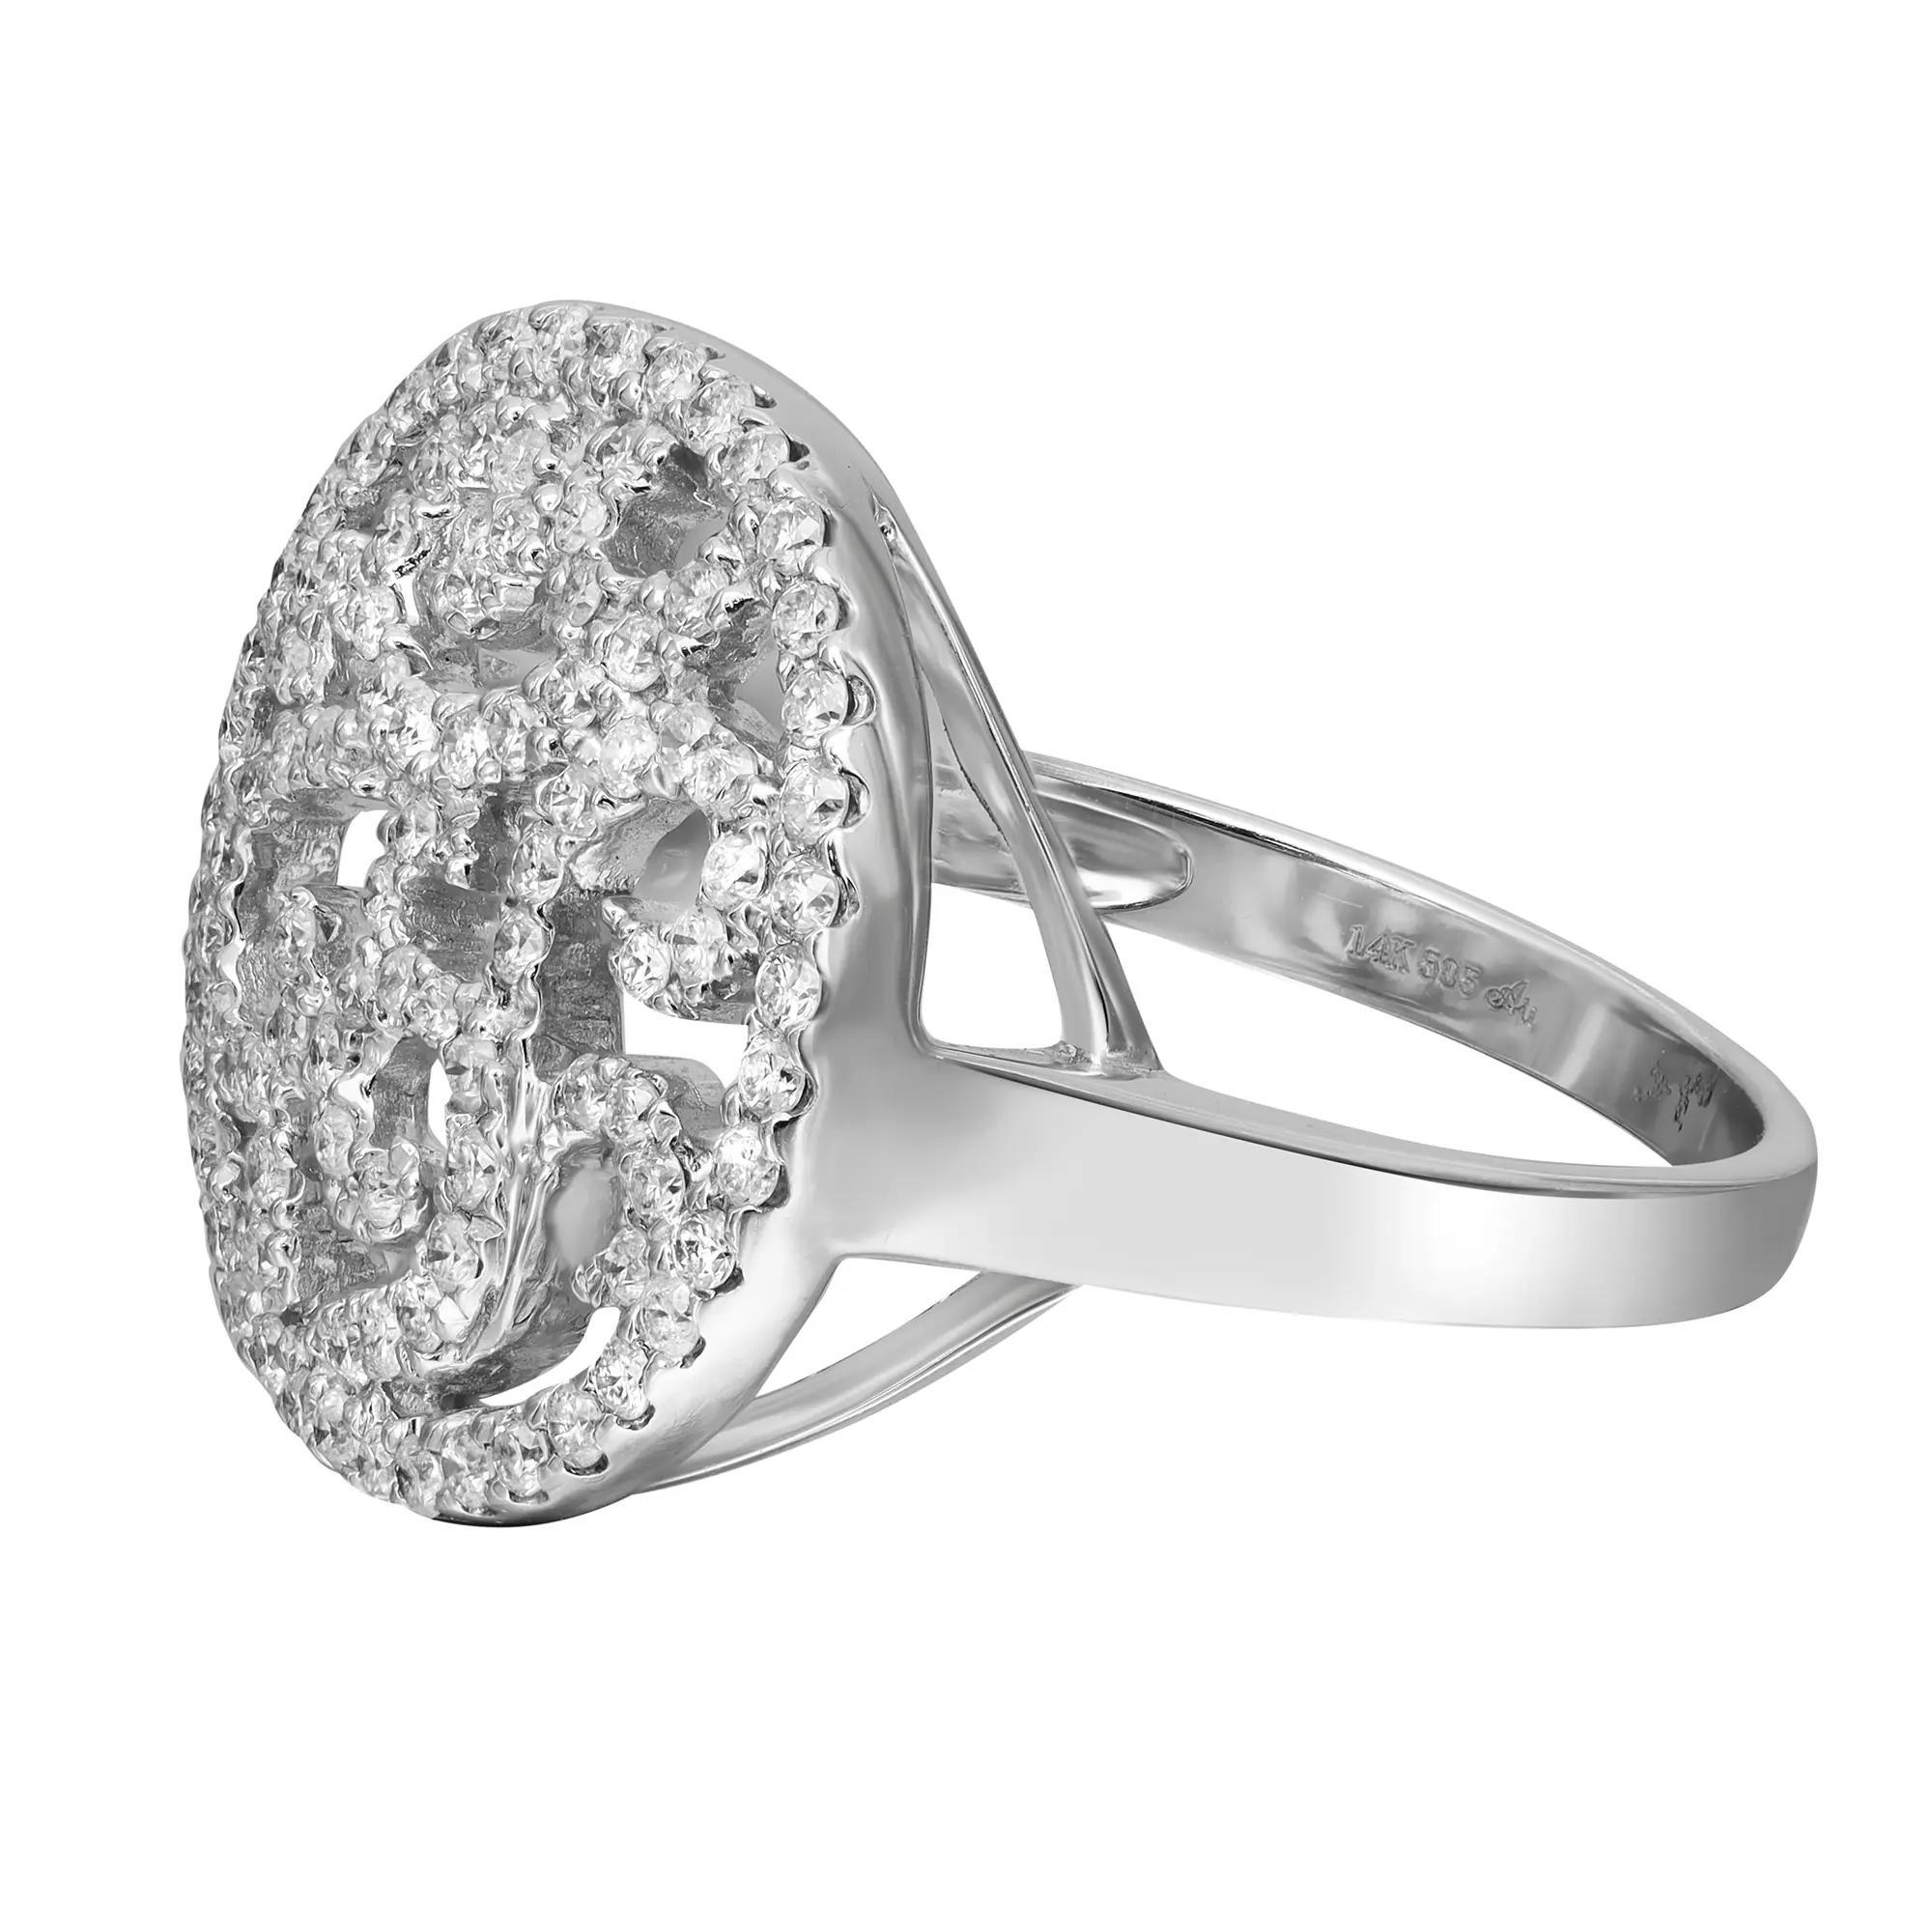 This bold and beautiful ring features prong set round cut diamonds set in a circular pattern. Total diamond weight: 0.76 carat. Diamond color I and SI1 clarity. Crafted in brightly polished 14k white gold. The ring size is 7.5 and the weight is 5.51